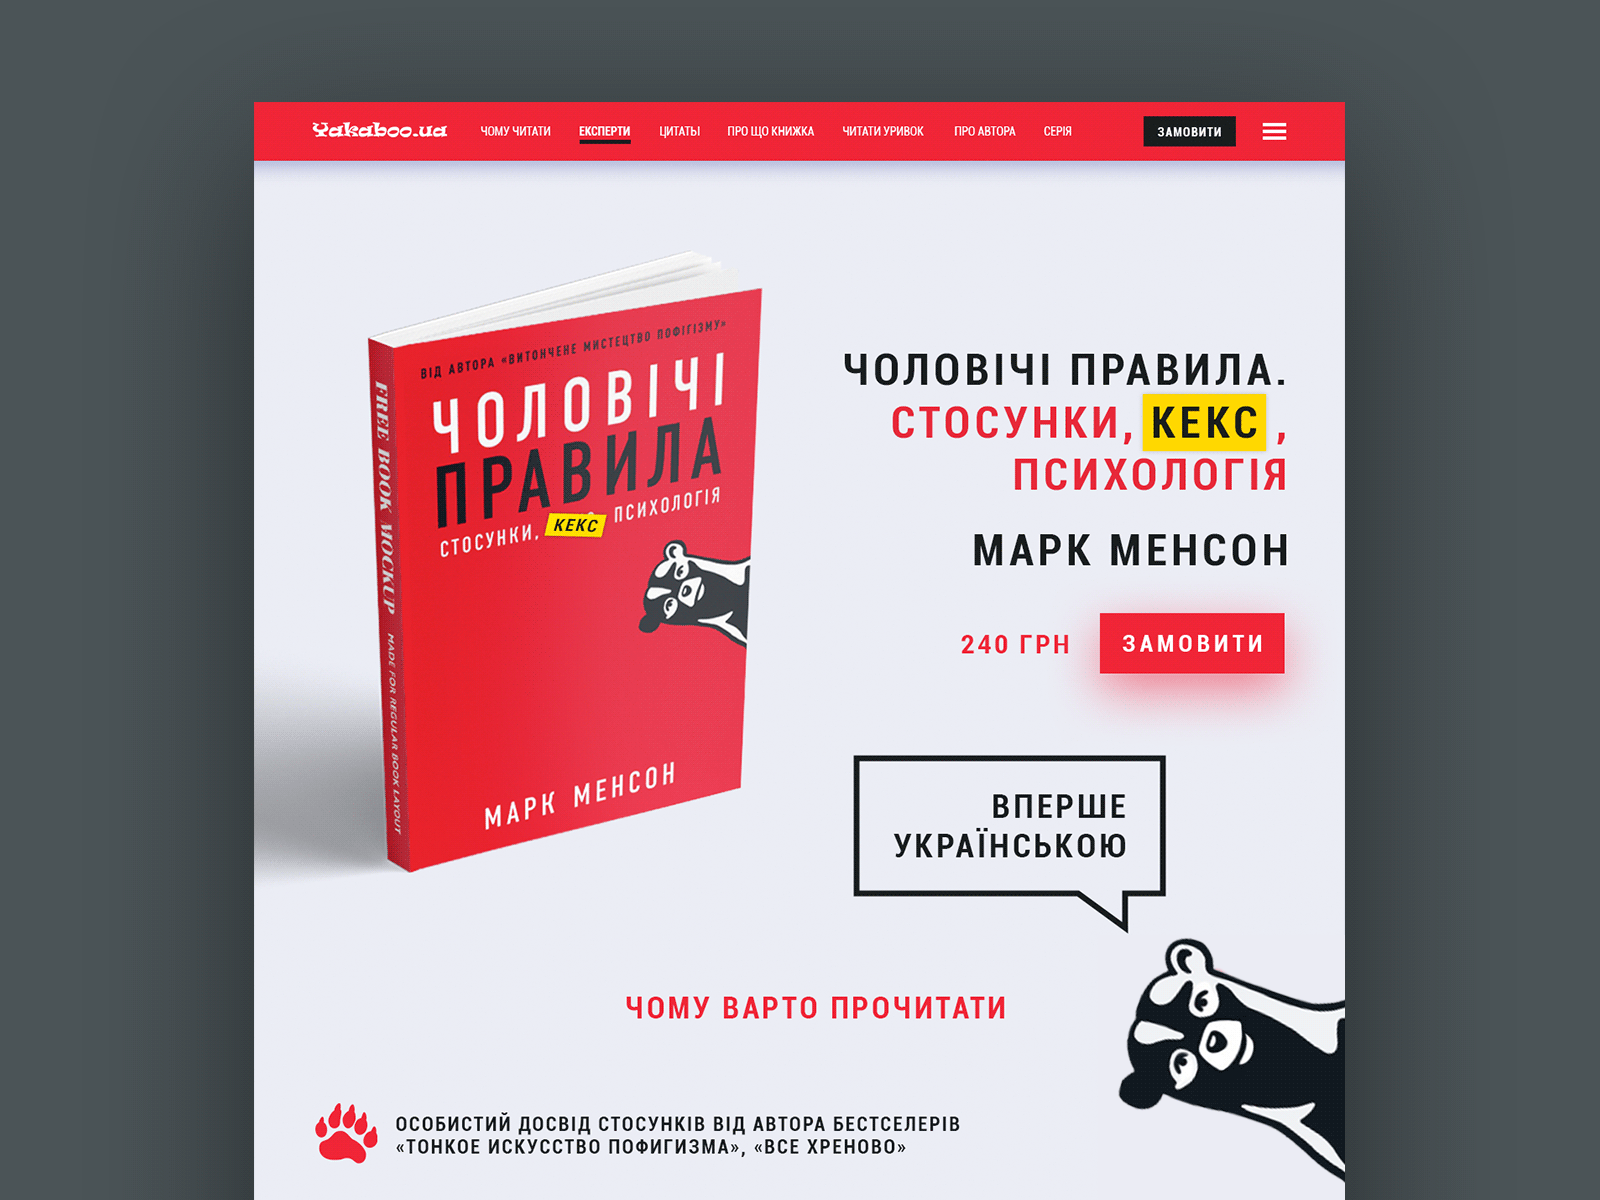 Book Promotion landing page